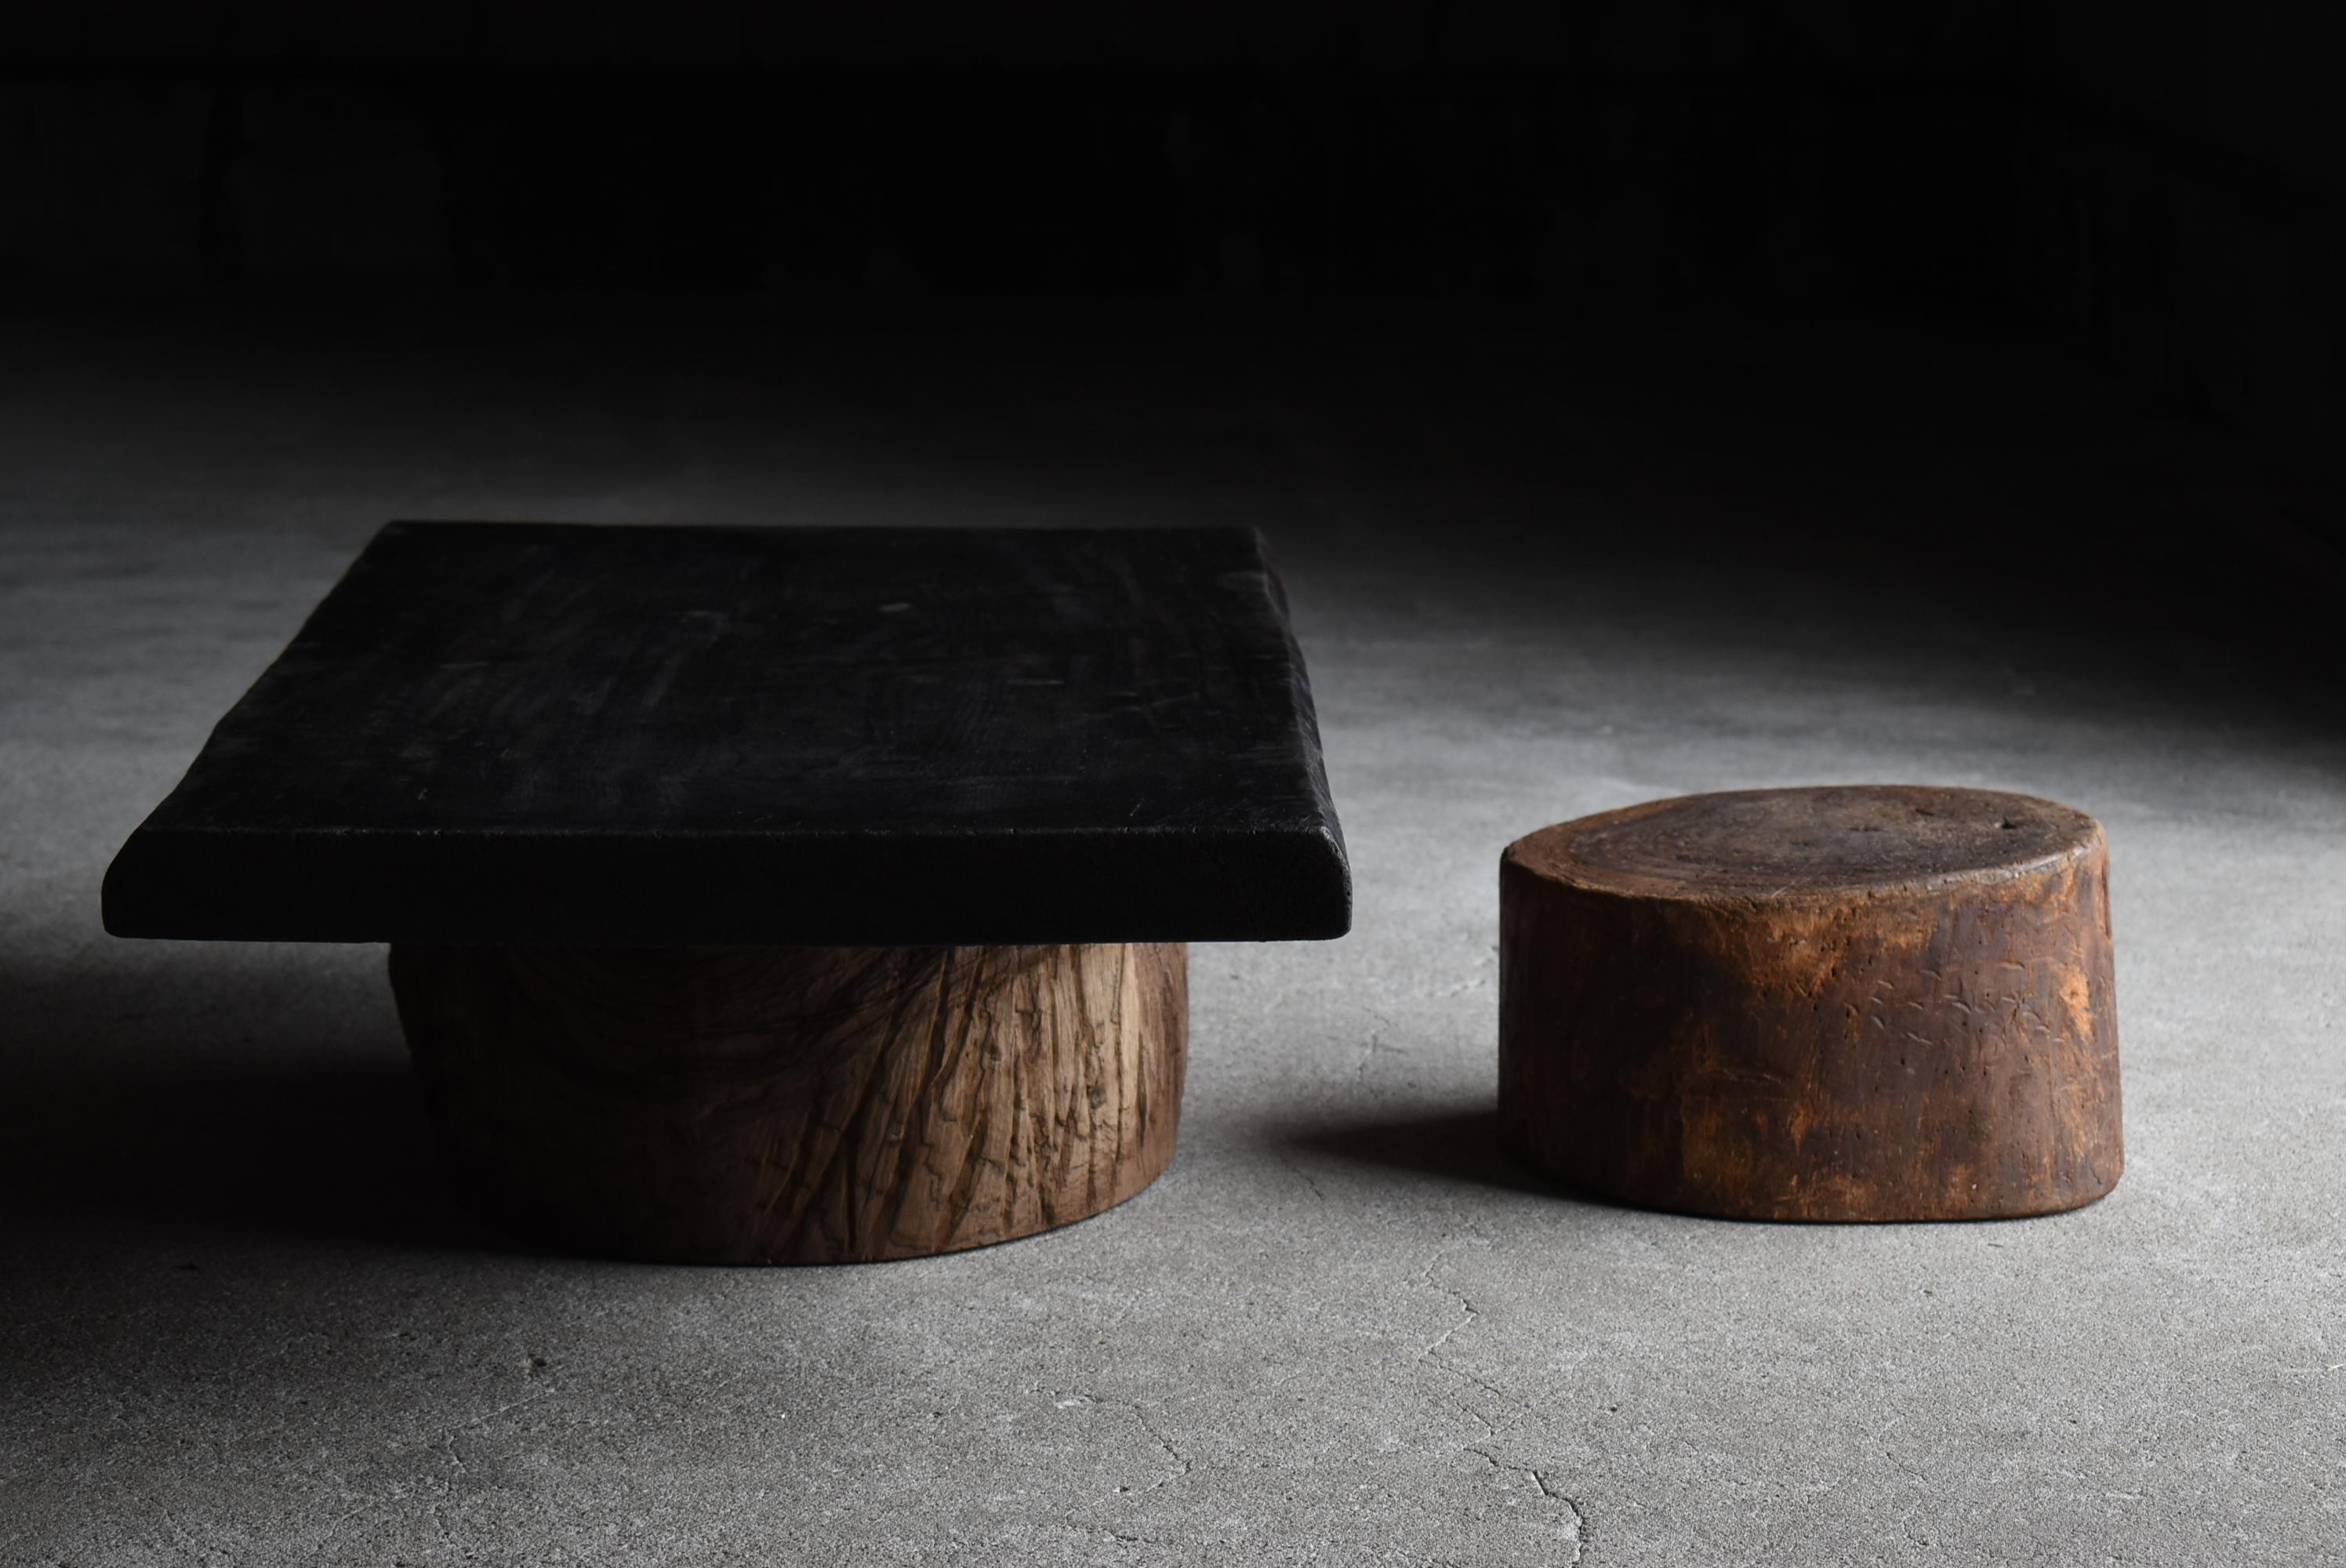 Very old Japanese wooden block stool.
It dates from the Meiji period (1860s-1900s).
The material is zelkova.

It is sturdy and stable.
The seat is slanted and easy to sit on.

The grain of the zelkova wood is beautiful.
Rustic and tasteful,